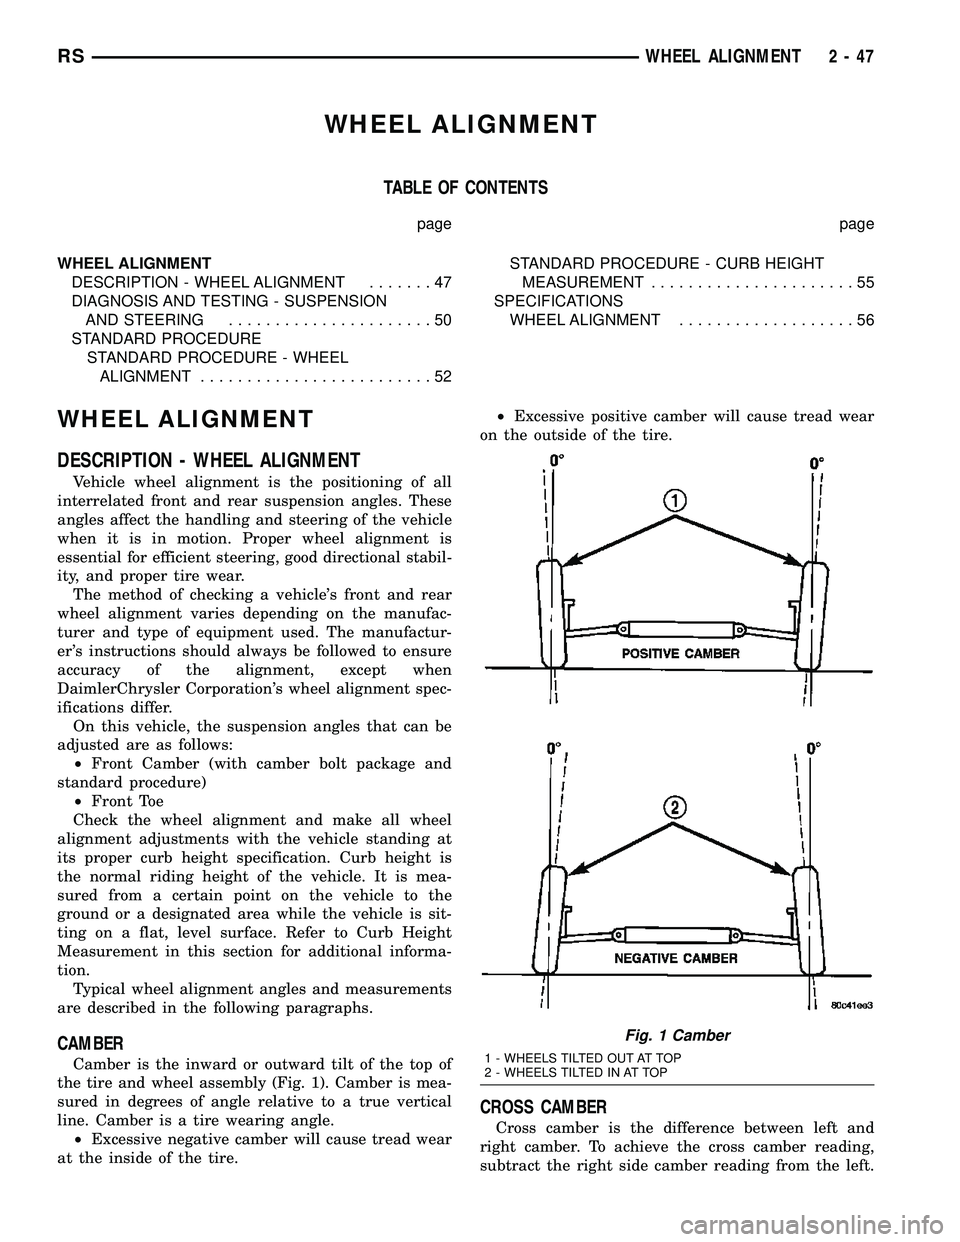 DODGE TOWN AND COUNTRY 2004  Service Manual WHEEL ALIGNMENT
TABLE OF CONTENTS
page page
WHEEL ALIGNMENT
DESCRIPTION - WHEEL ALIGNMENT.......47
DIAGNOSIS AND TESTING - SUSPENSION
AND STEERING......................50
STANDARD PROCEDURE
STANDARD P